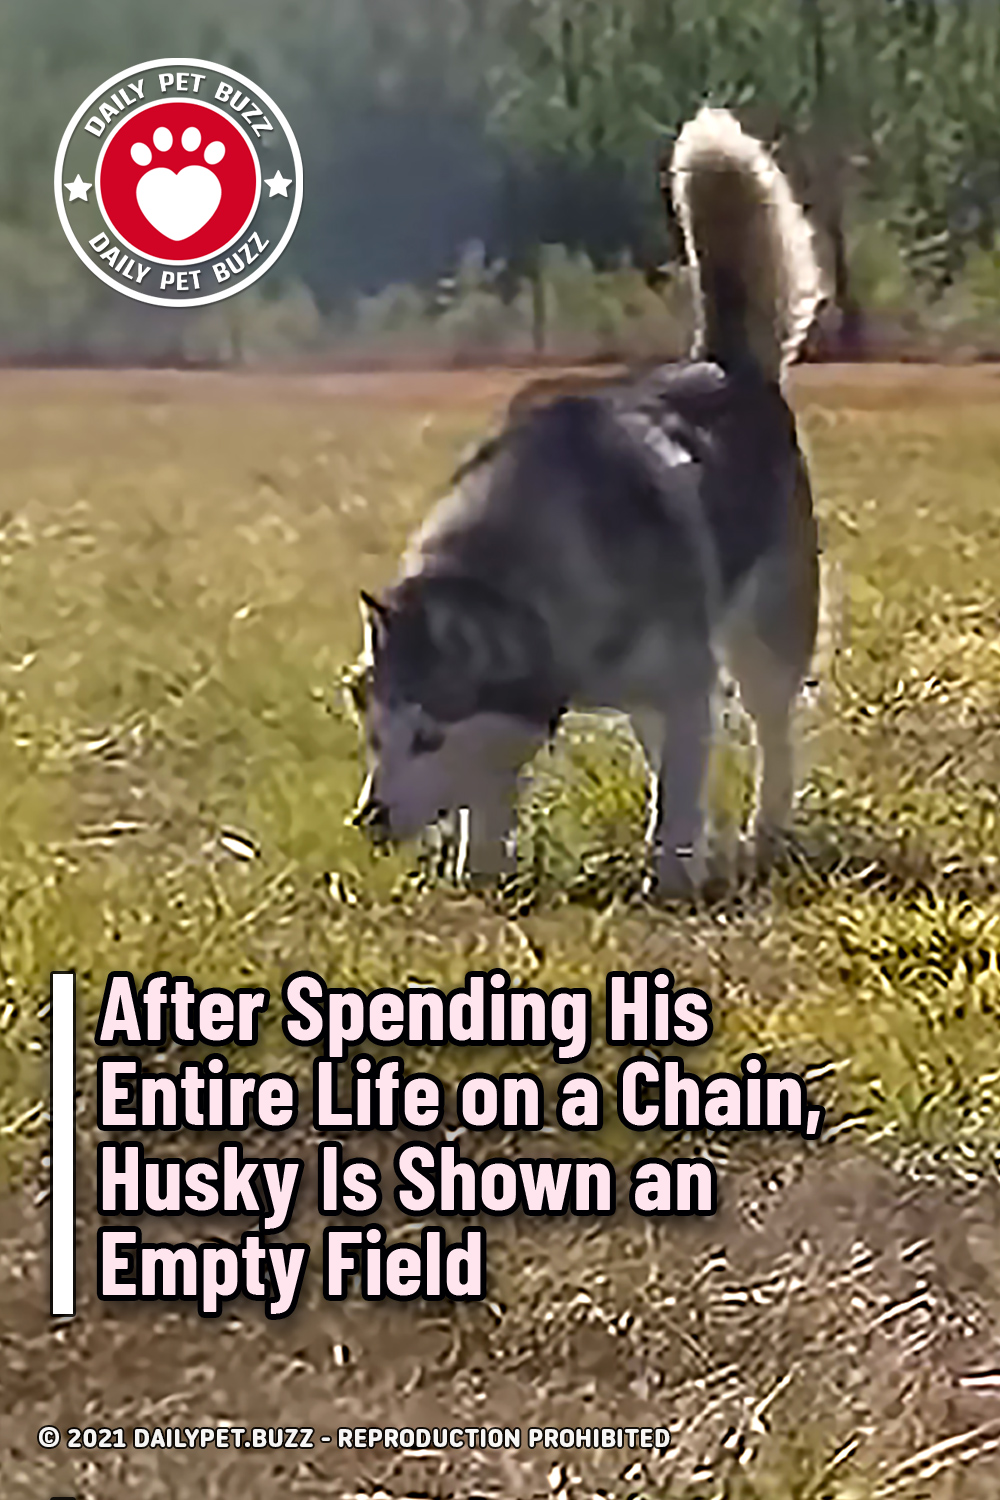 After Spending His Entire Life on a Chain, Husky Is Shown an Empty Field